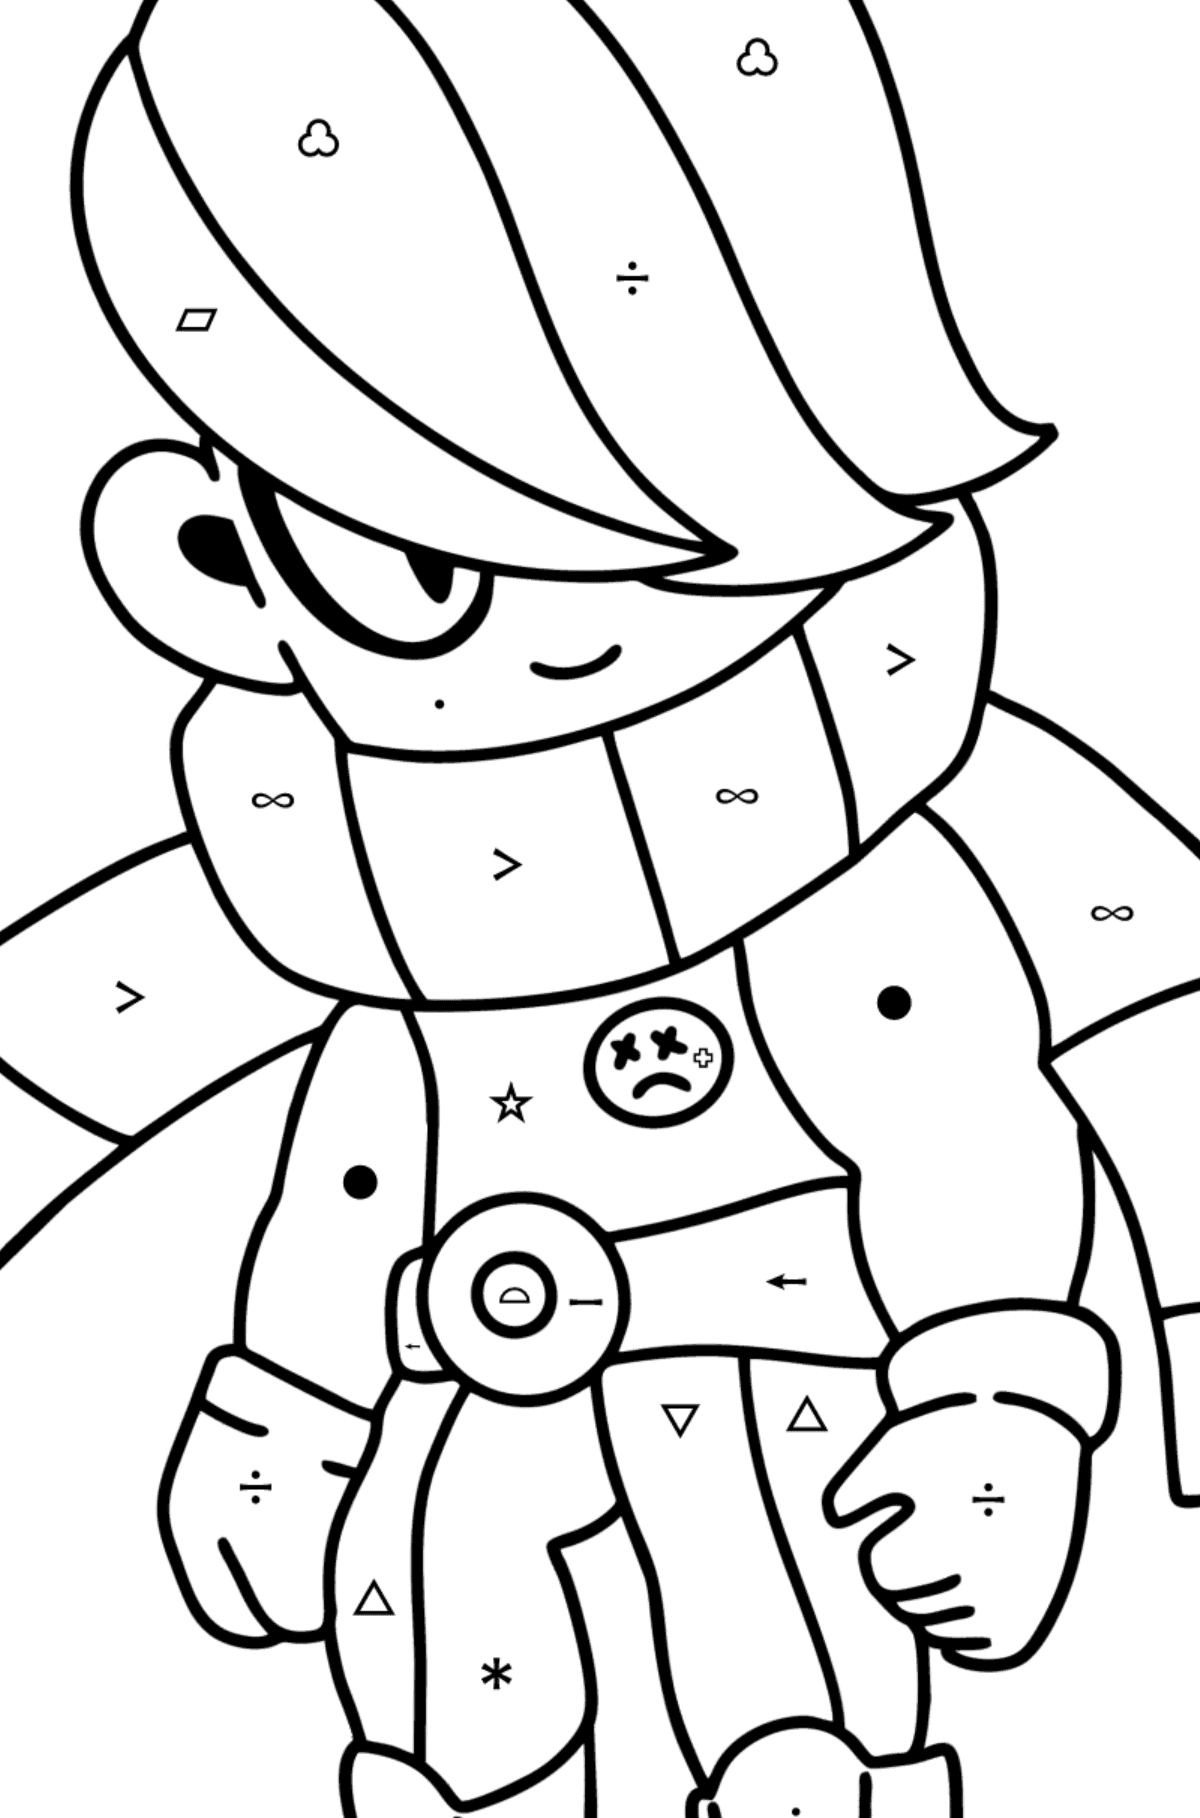 Brawl Stars Edgar coloring page - Coloring by Symbols and Geometric Shapes for Kids